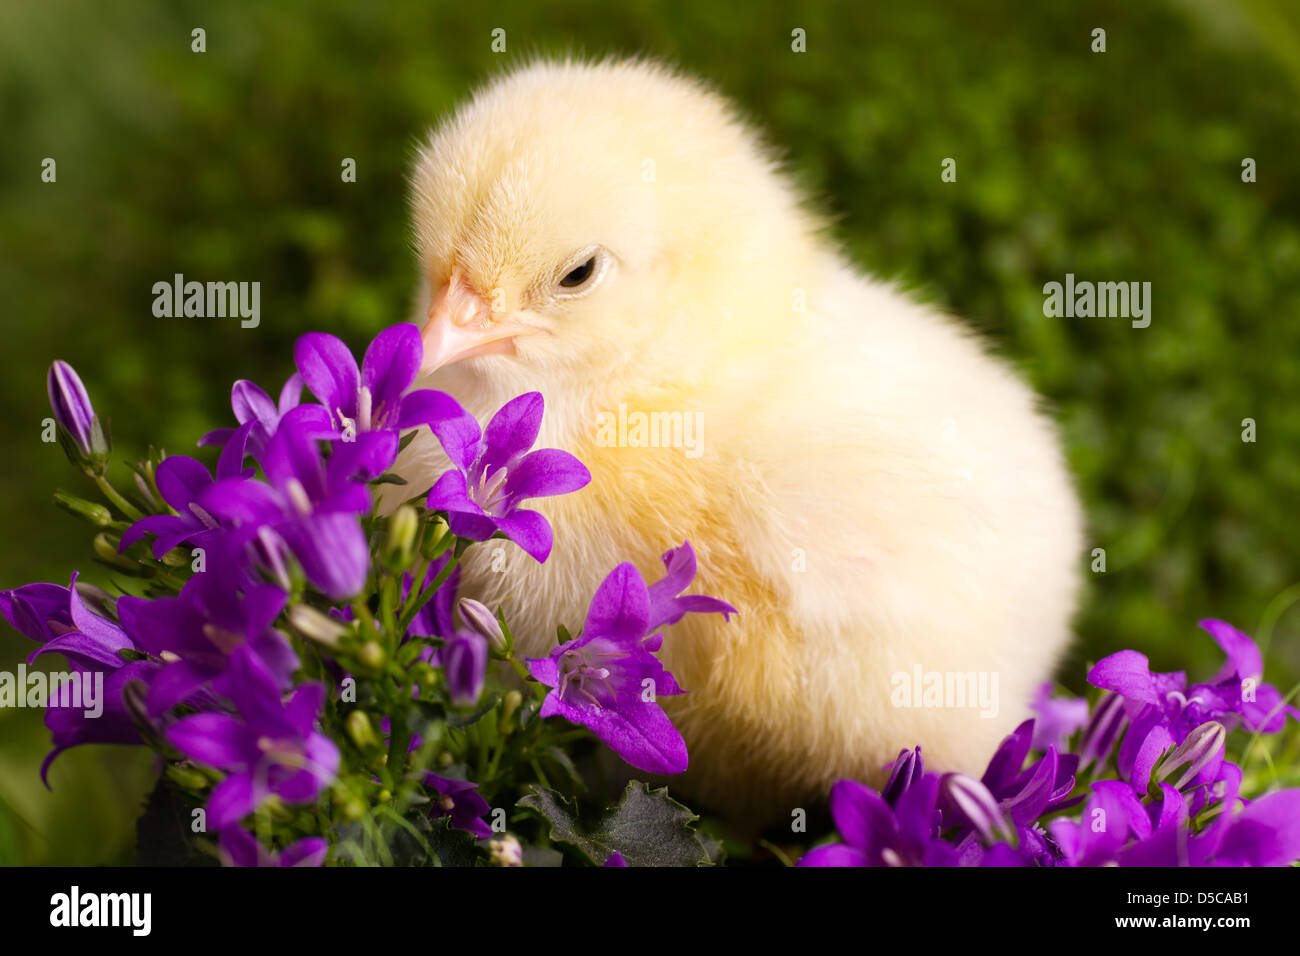 Beautiful little chicken with flowers Stock Photo